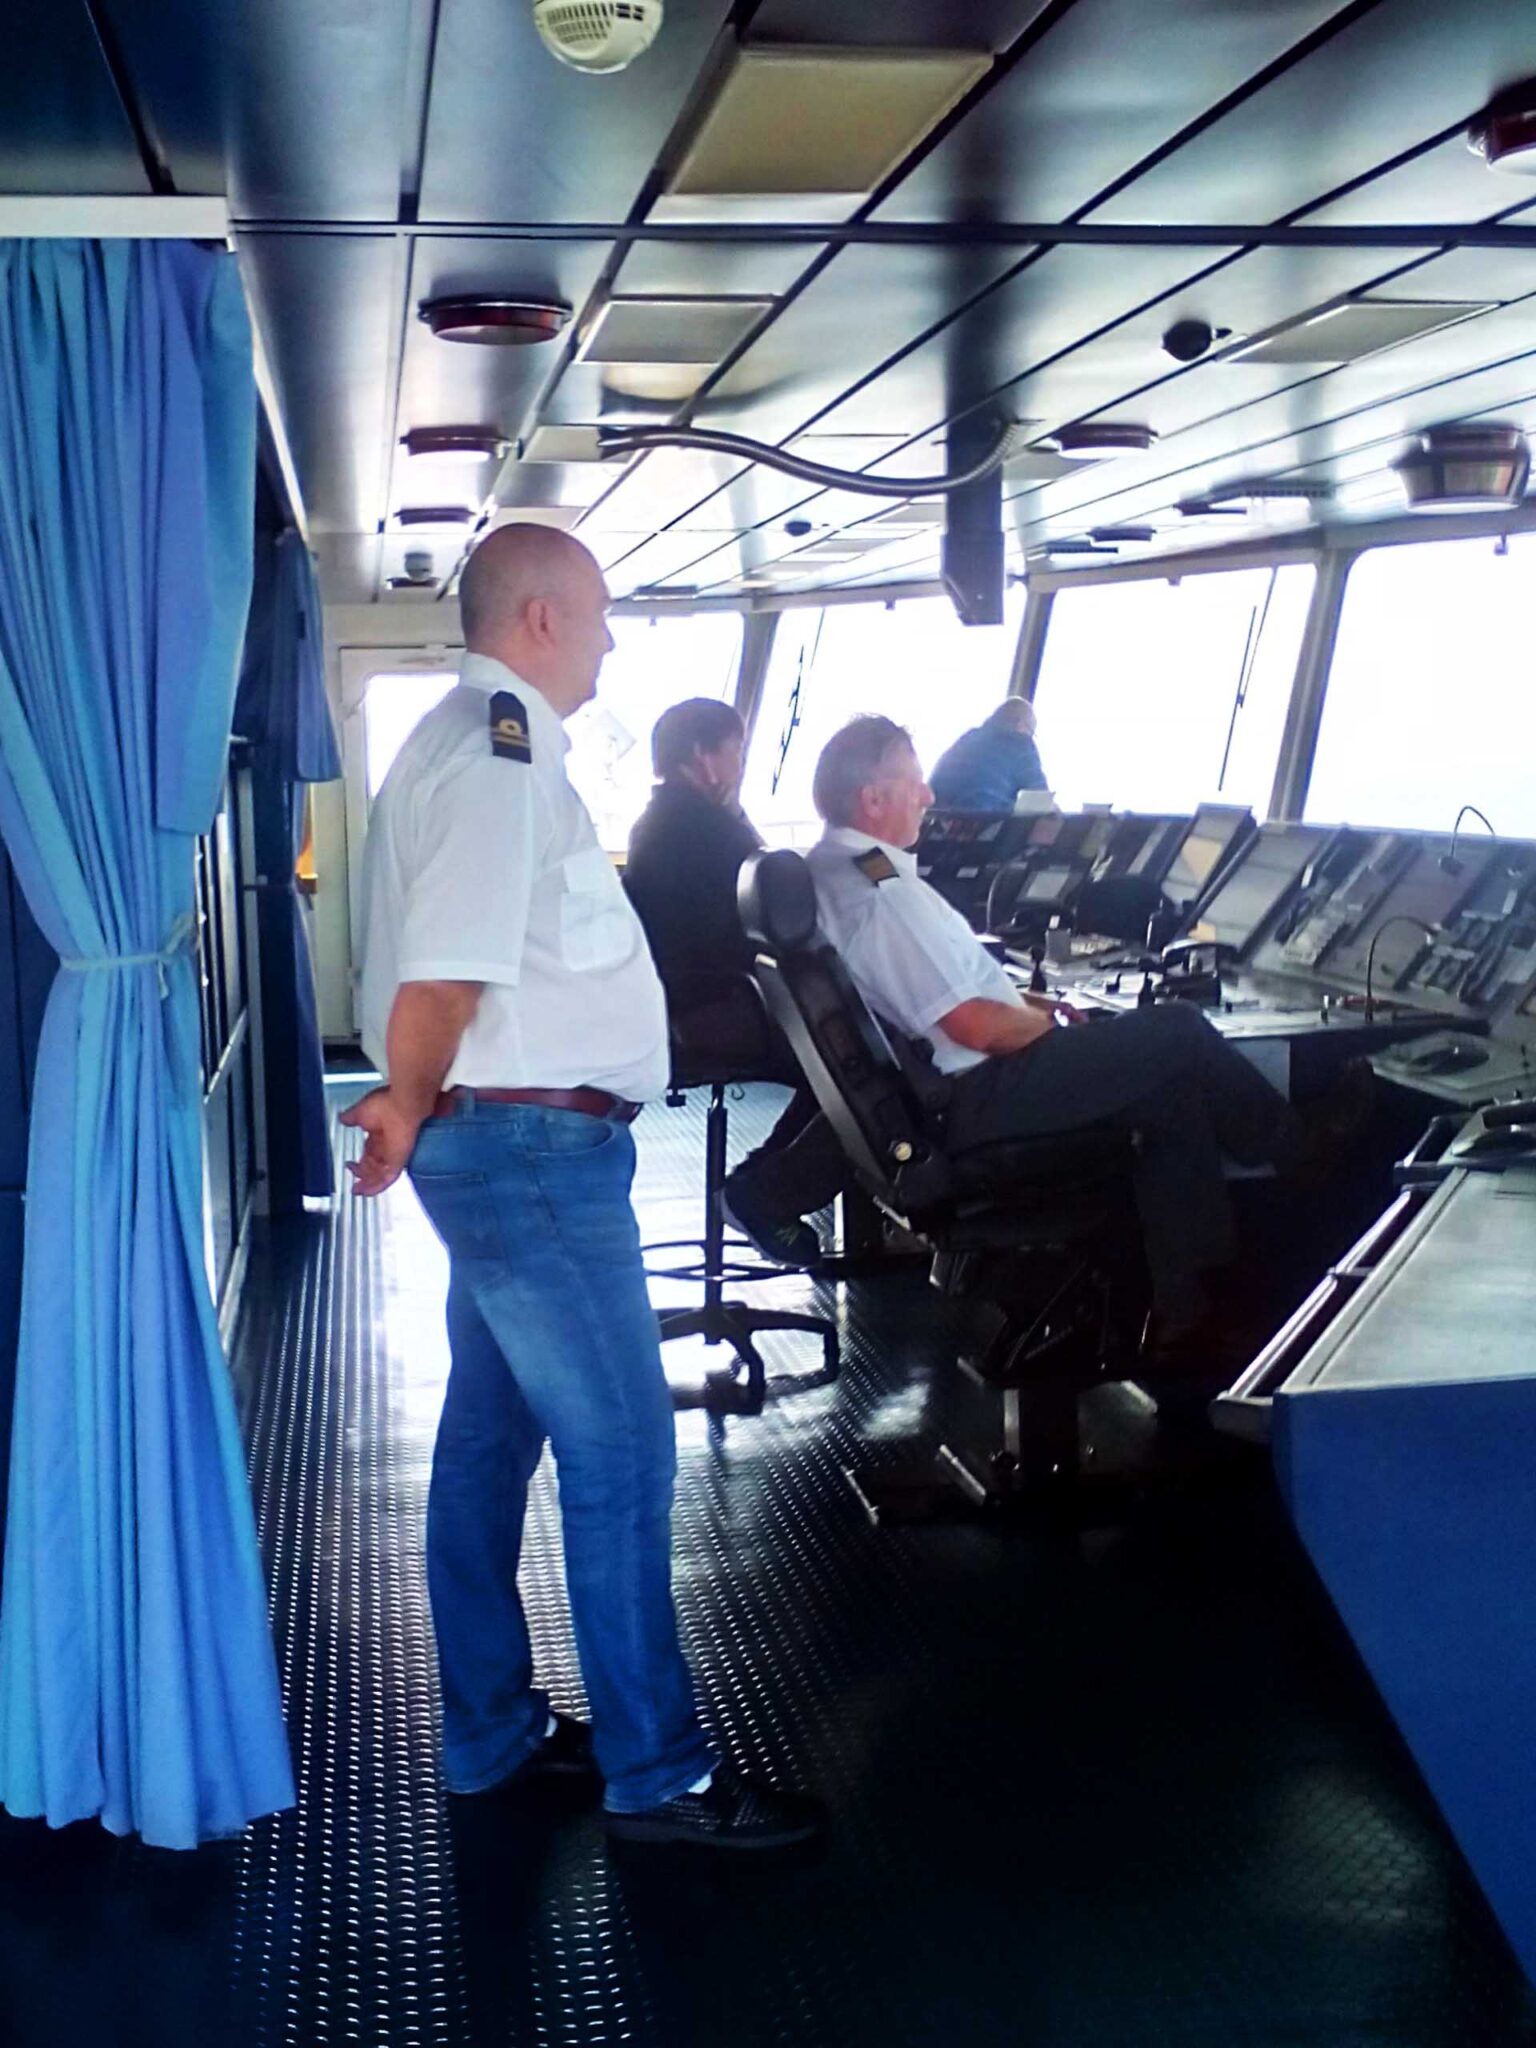 The Second Mate, Captain, Pilot, and helmsman on the bridge during pilotage operation.